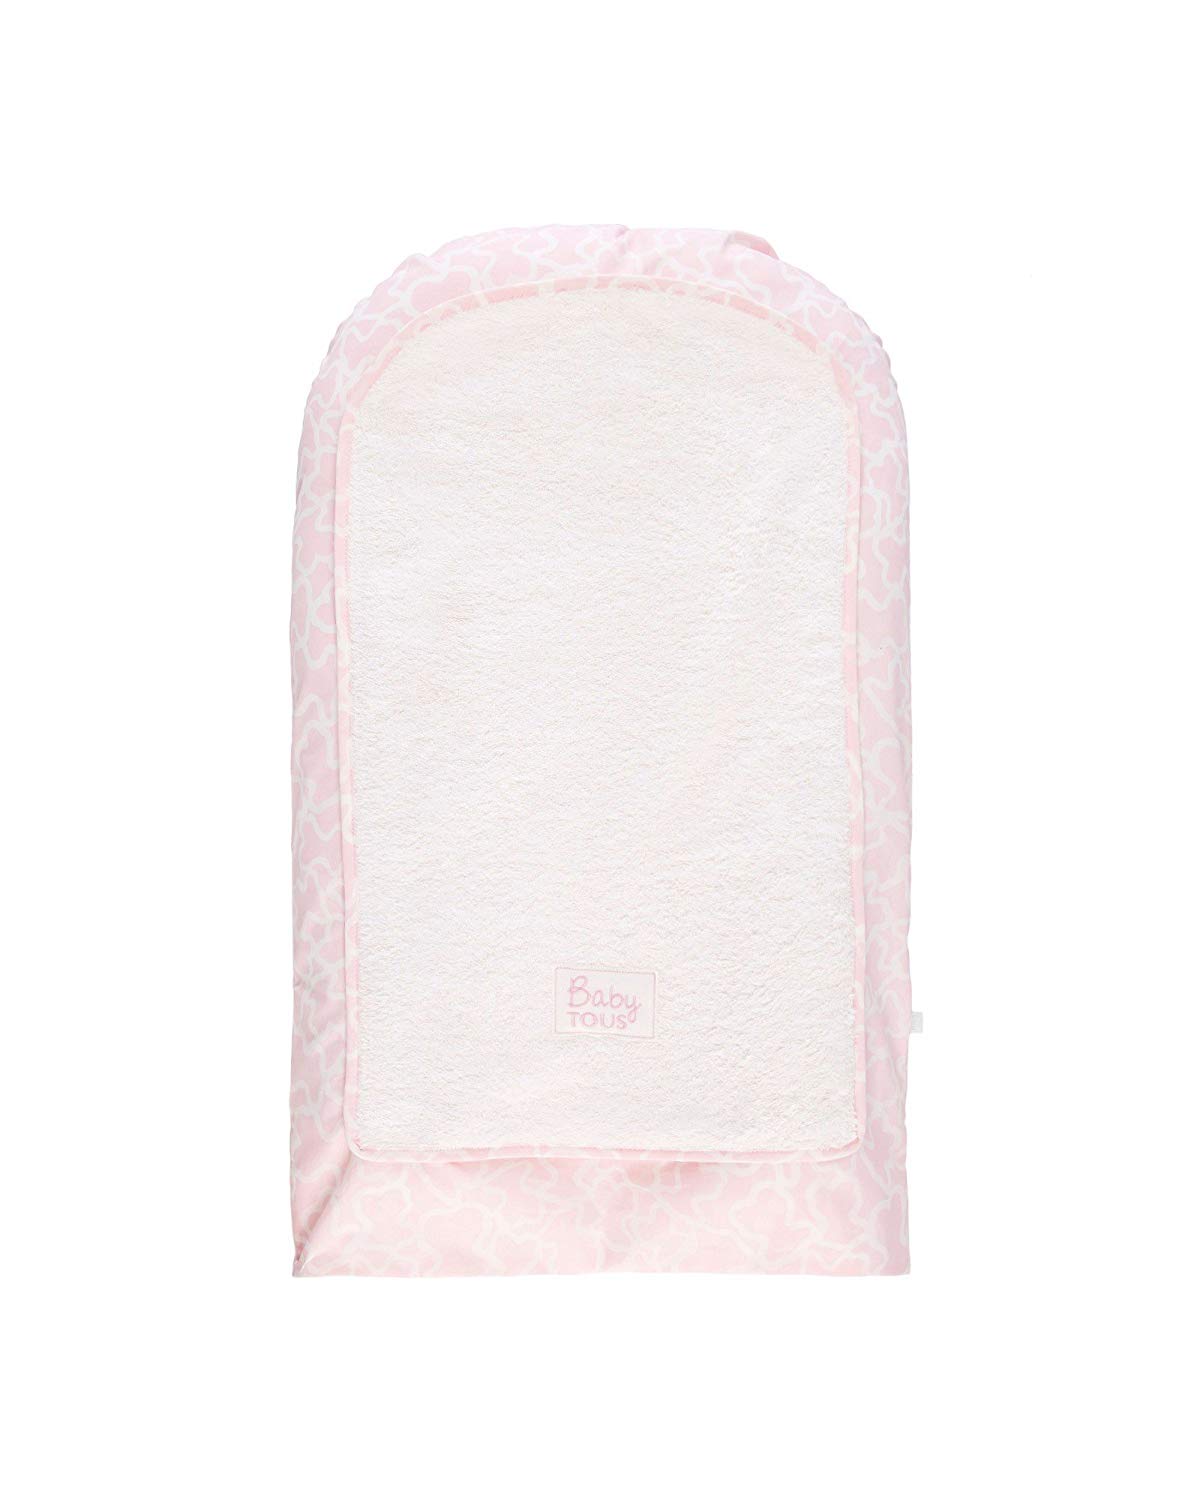 Tous Baby Hom-10_00047_0/24M - Changing Mat for Chest of Drawers